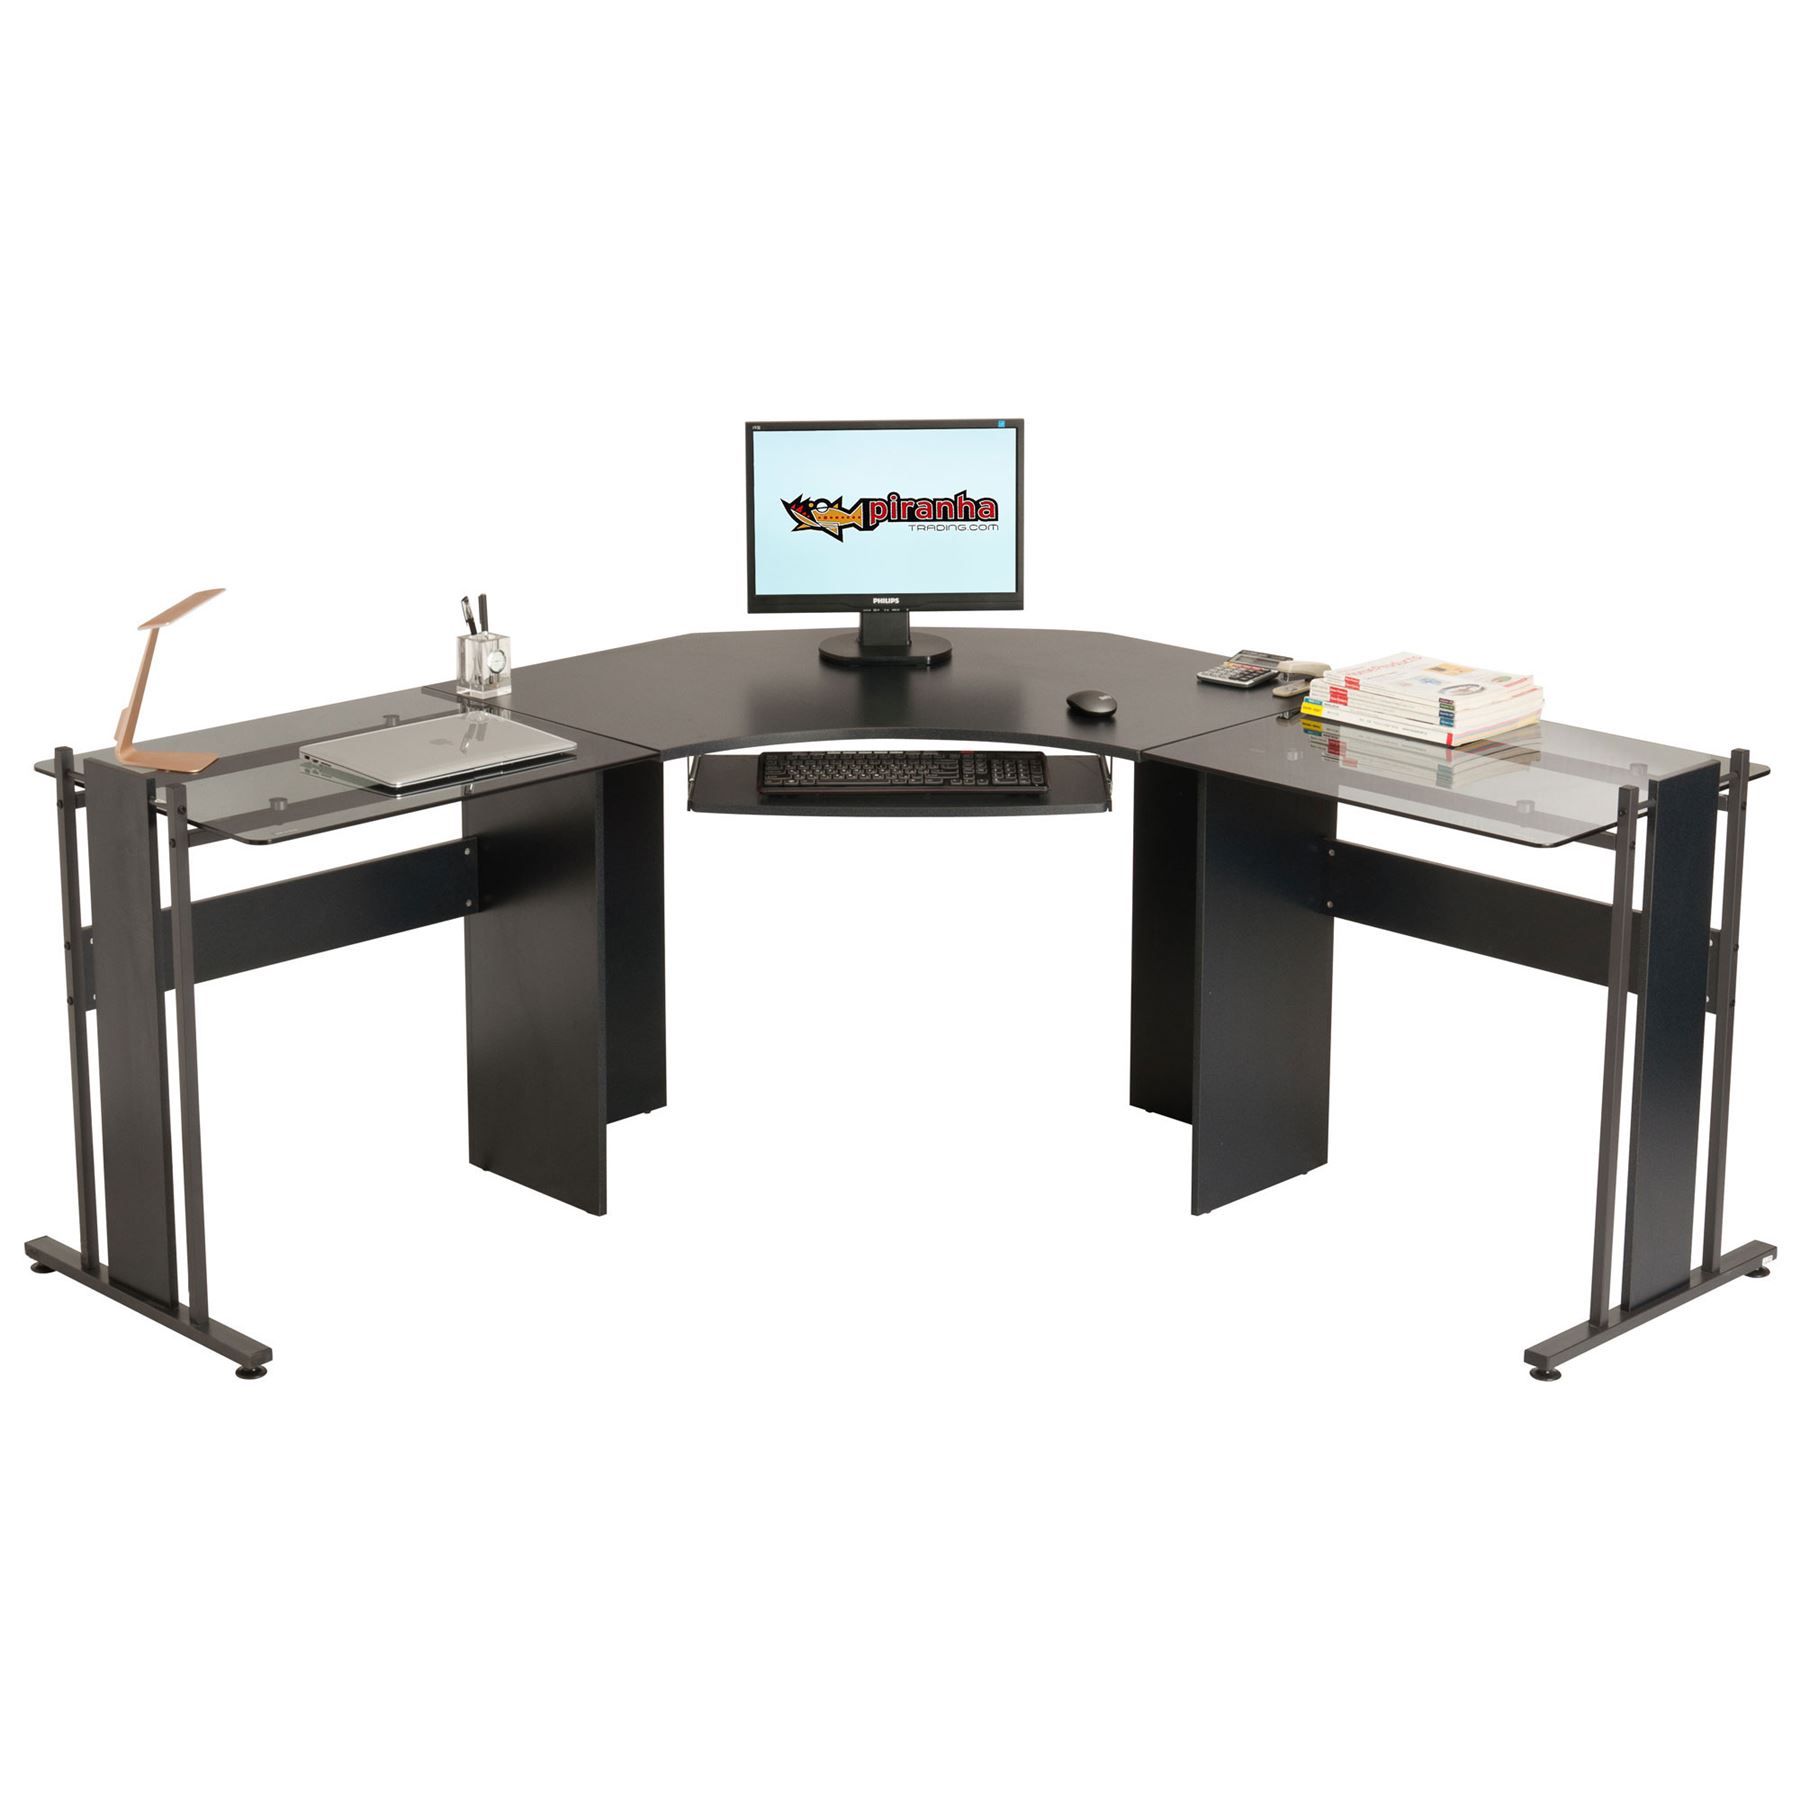 Large Corner Desk Graphite Black Finish For Home Office Piranha In Graphite Convertible Desks With Keyboard Shelf (View 2 of 15)